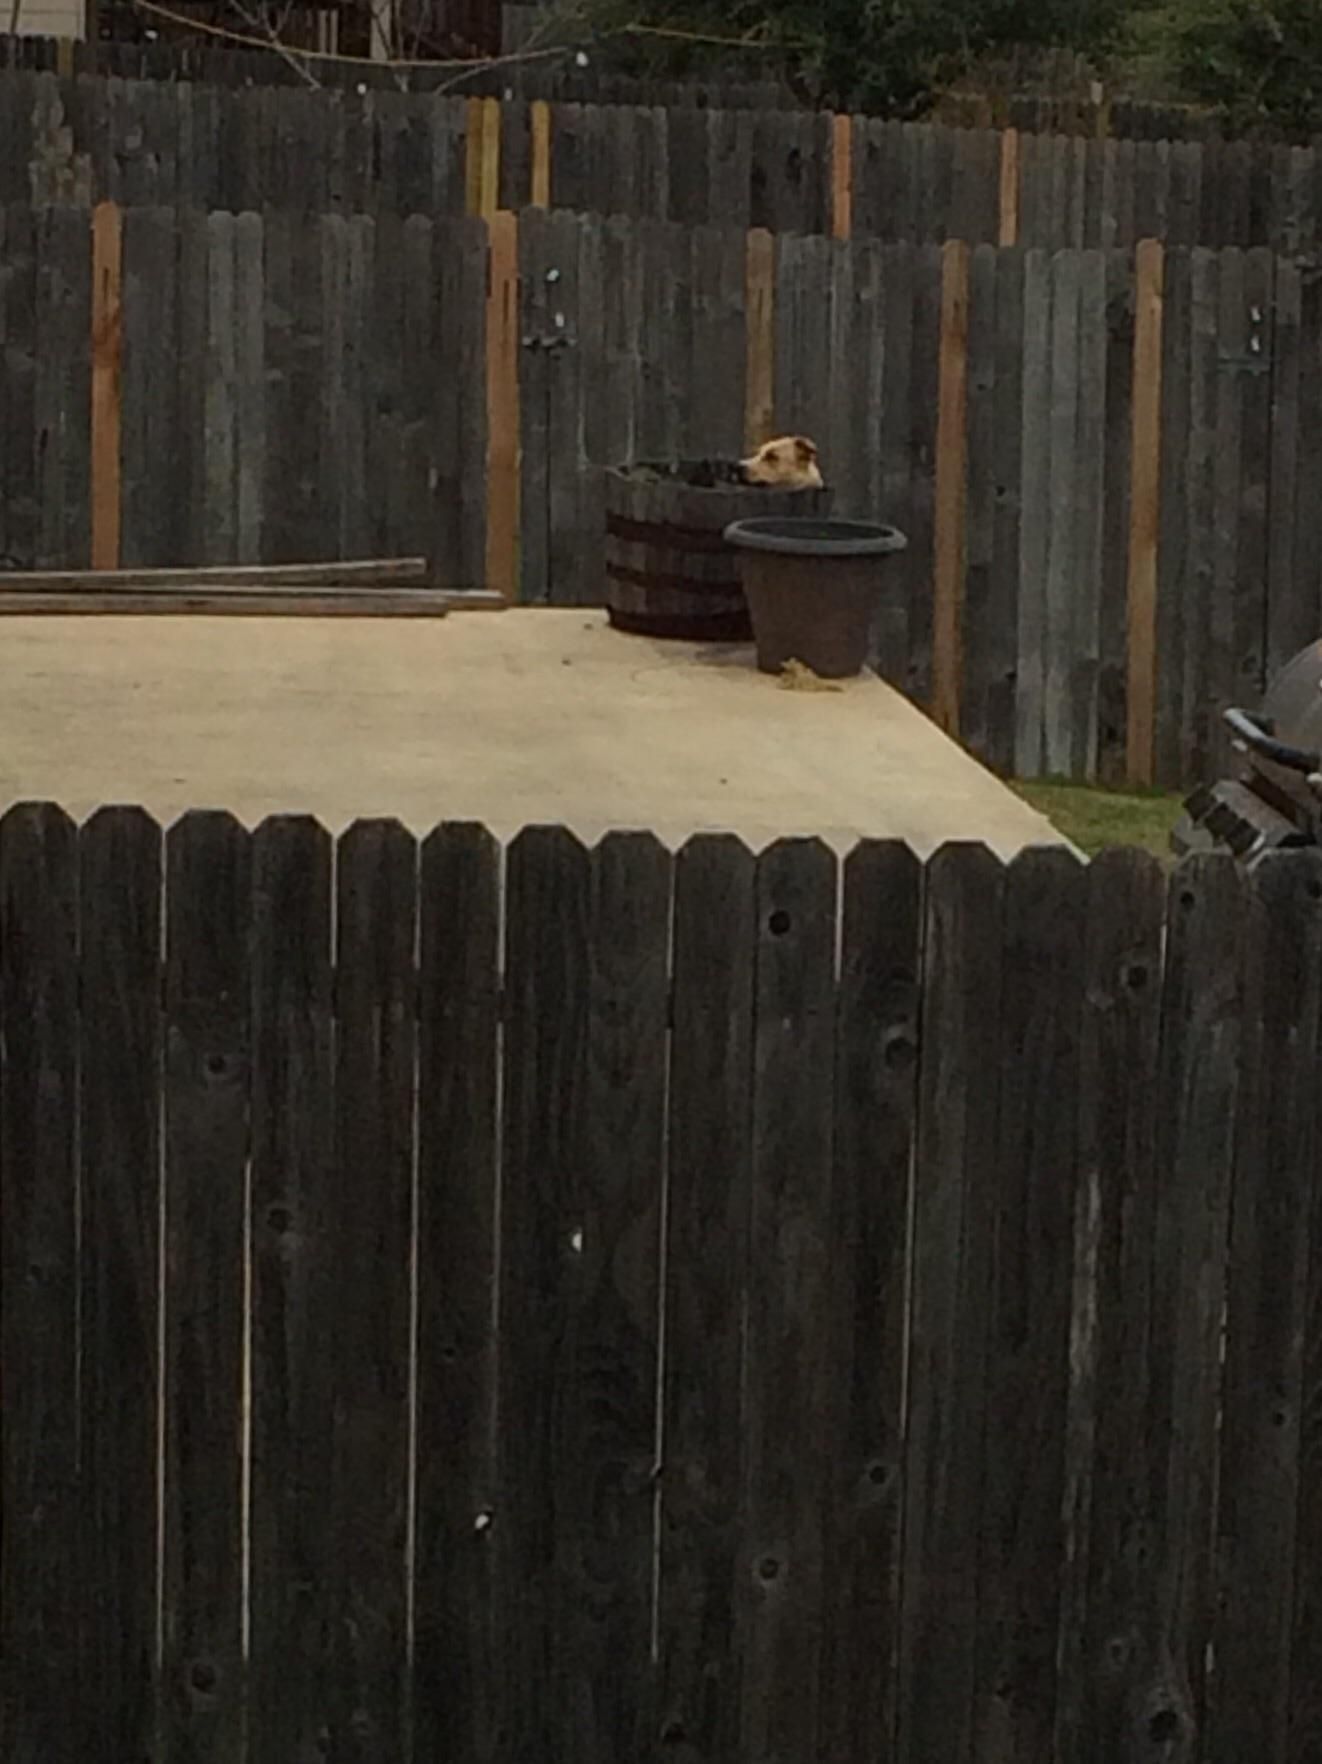 Neighbor's dog likes spending his time sitting inside a barrel